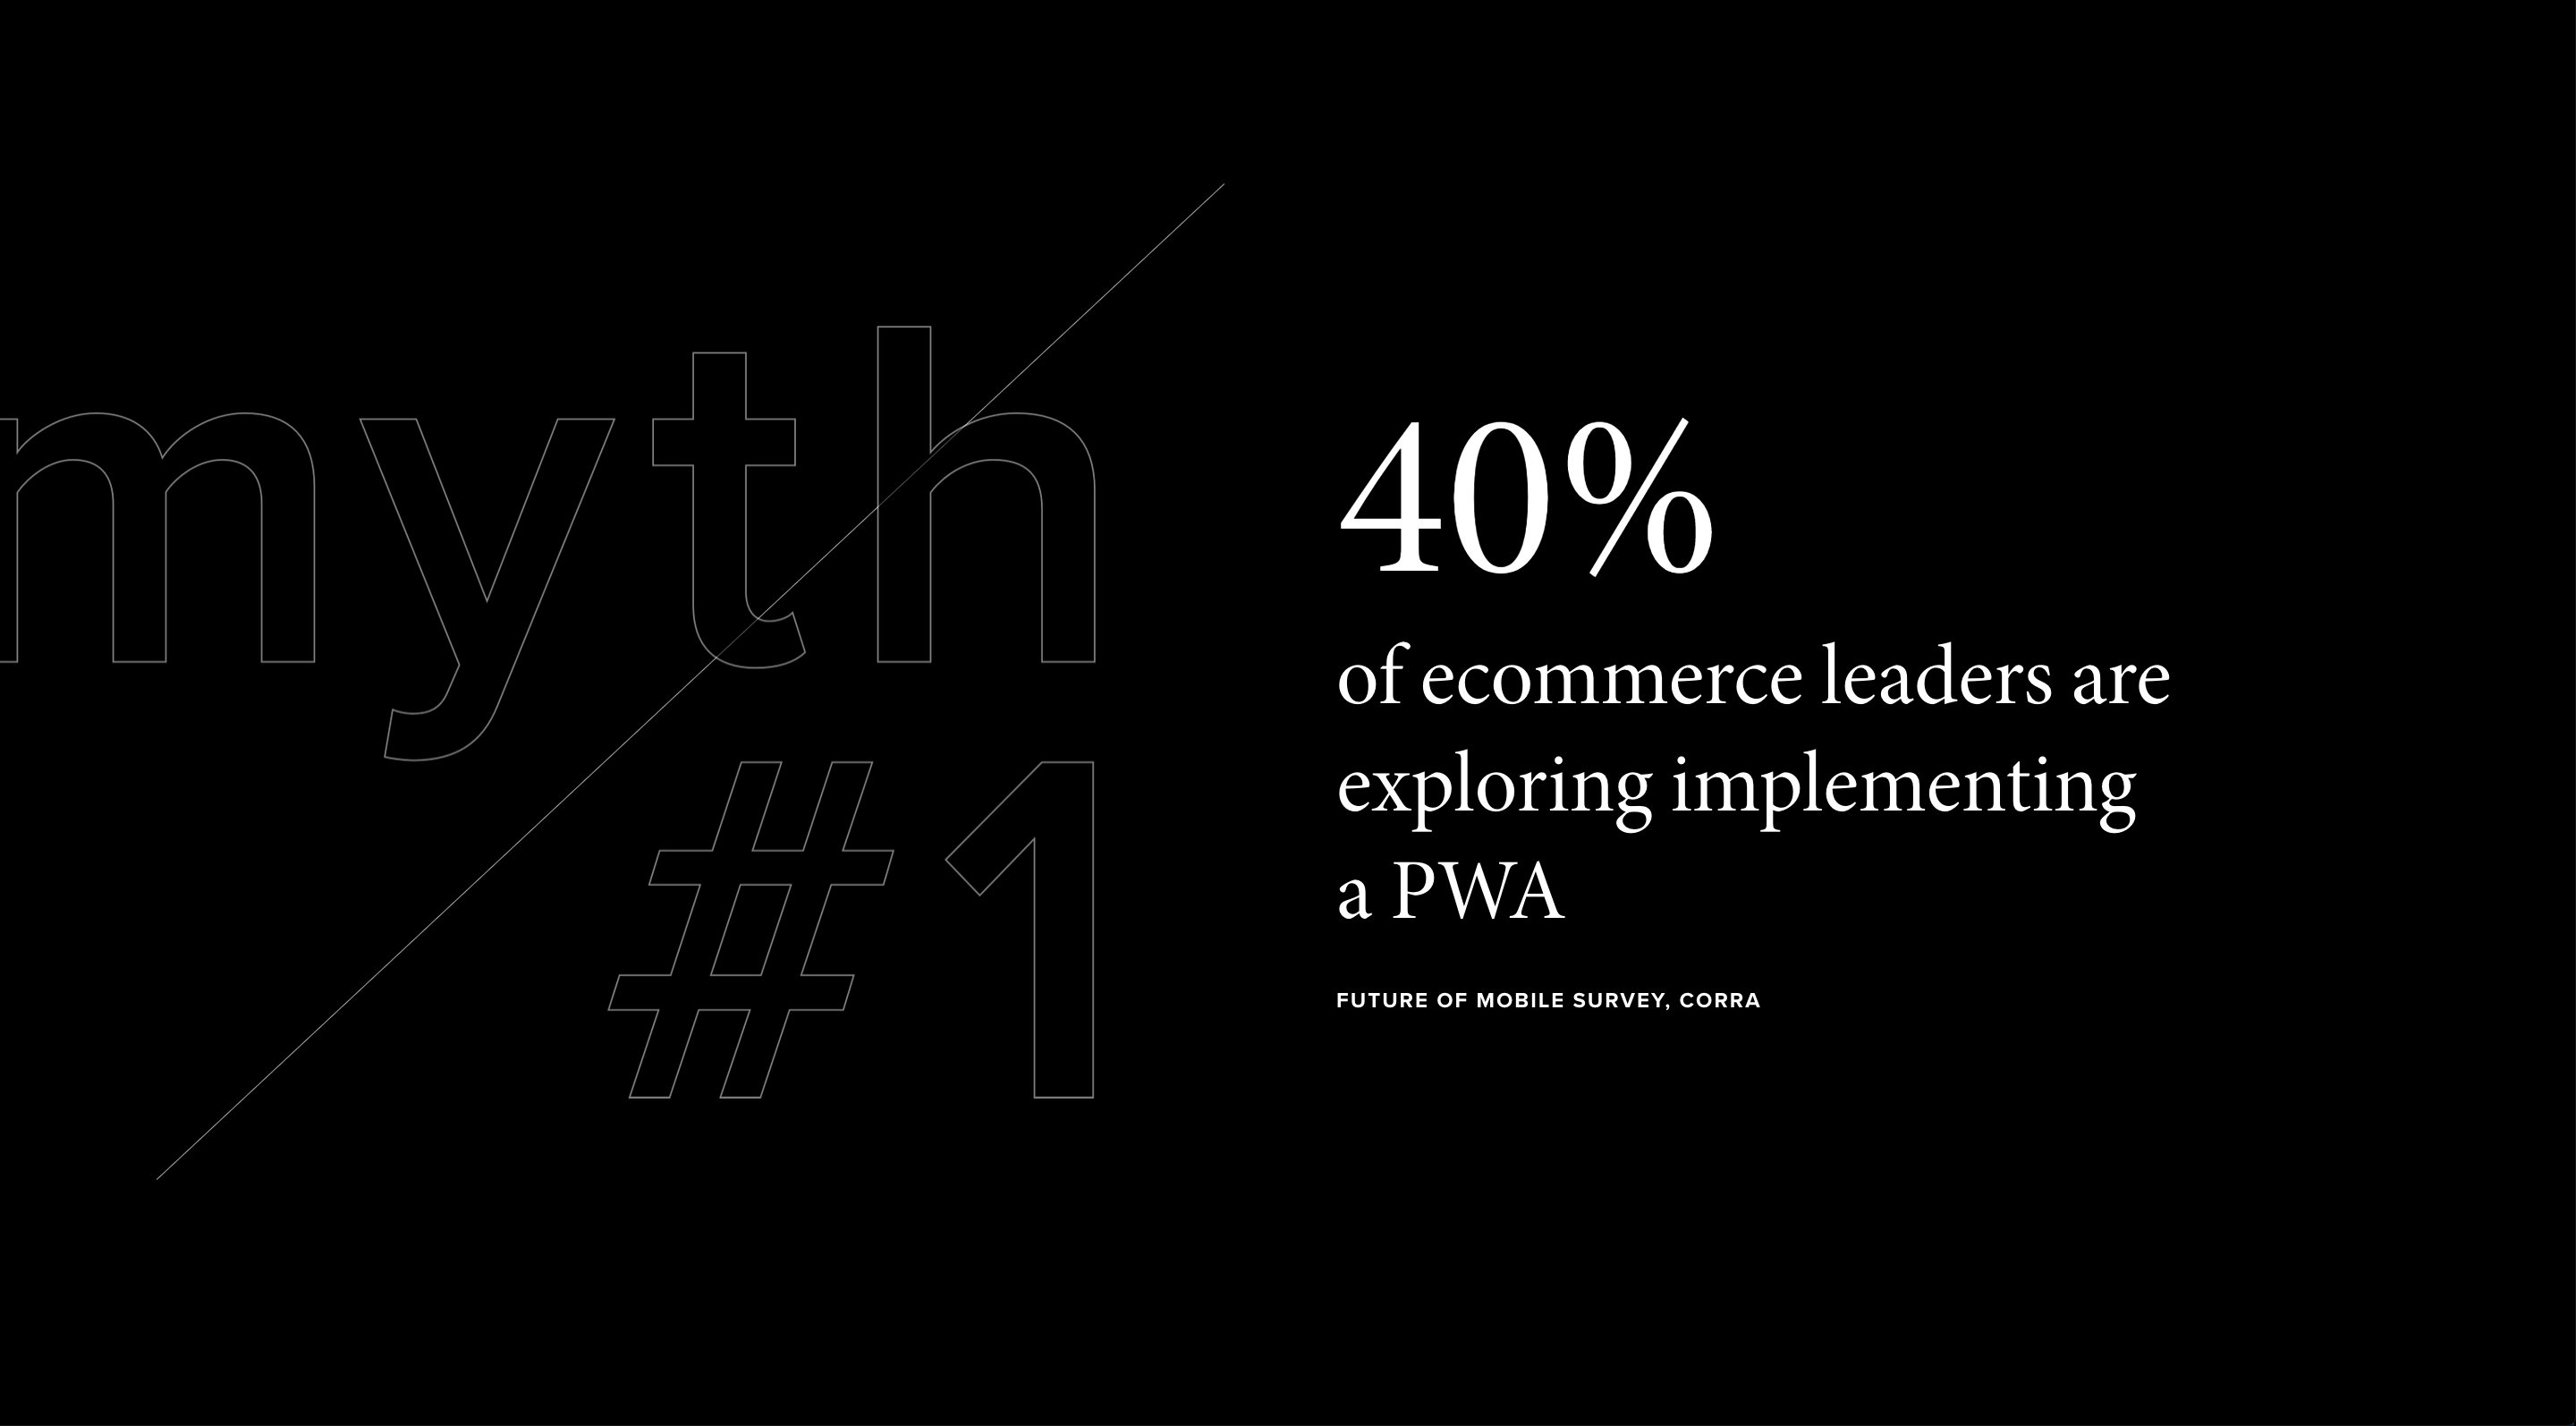 A survey finding from Corra's report on mobile traffic and mcommerce suggests that 40% of ecommerce leaders are exploring implementing a PWA 